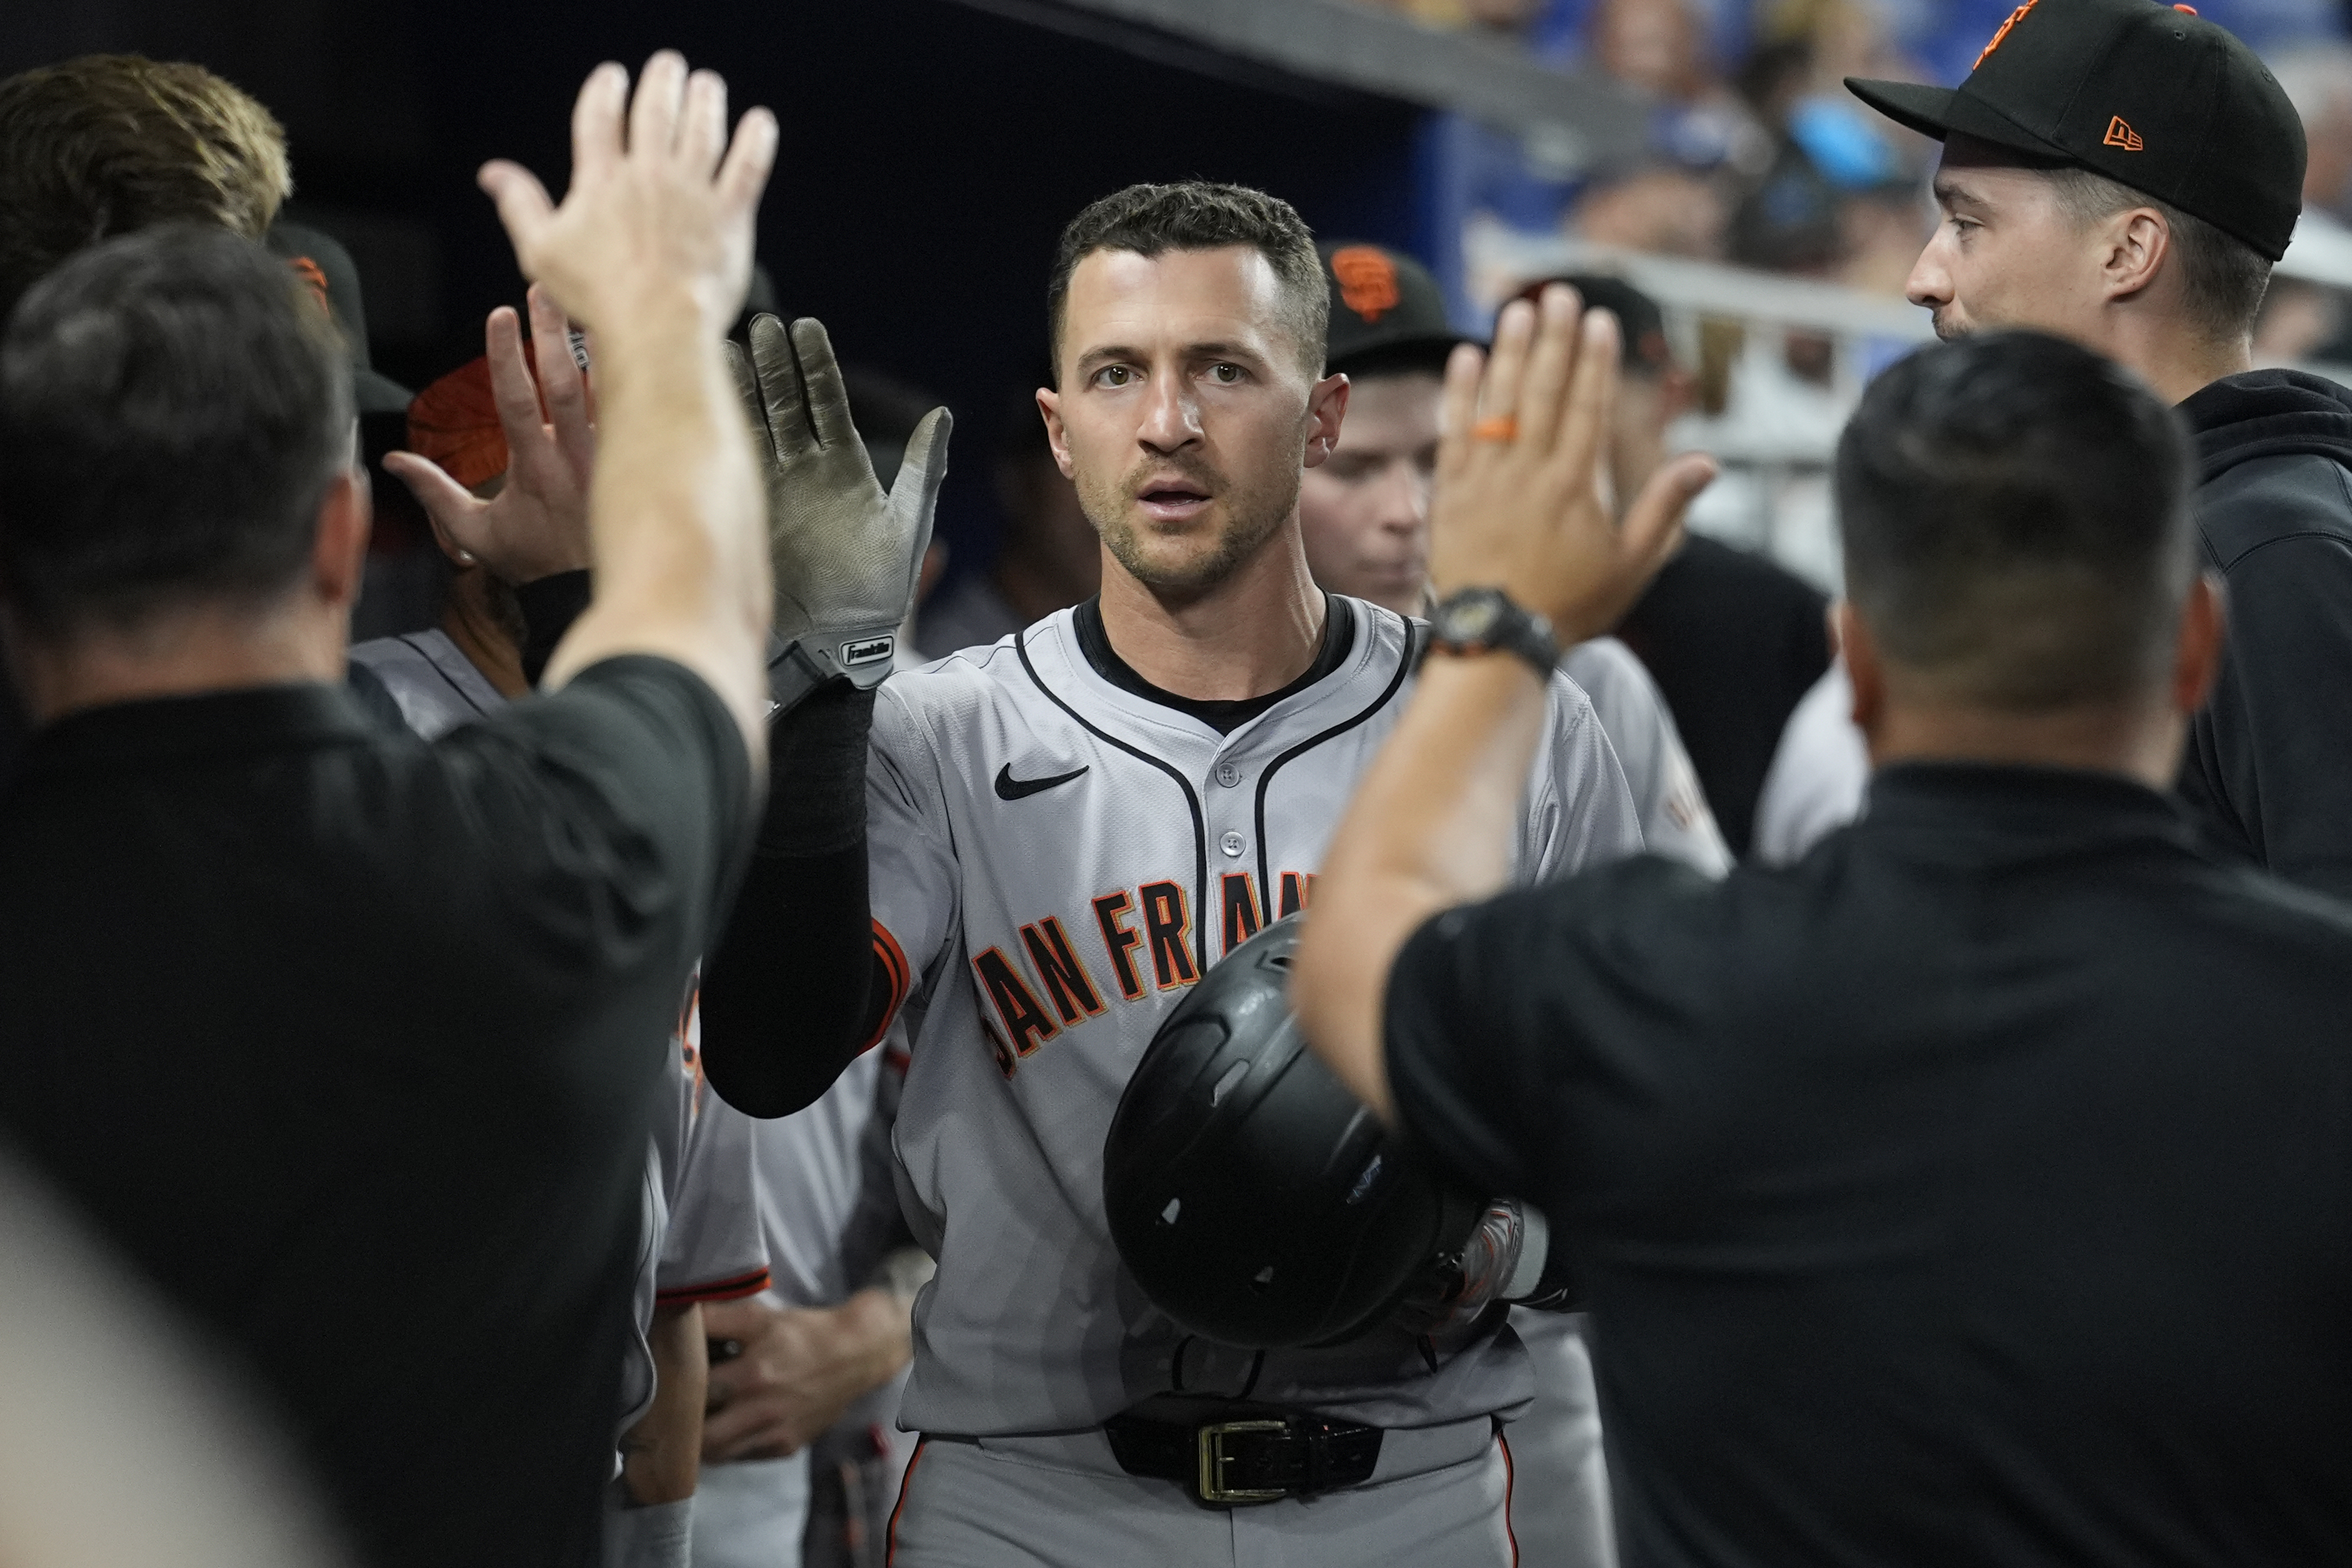 giants rally with 3 runs in 7th to beat nl-worst marlins. miami manager skip schumaker is tossed